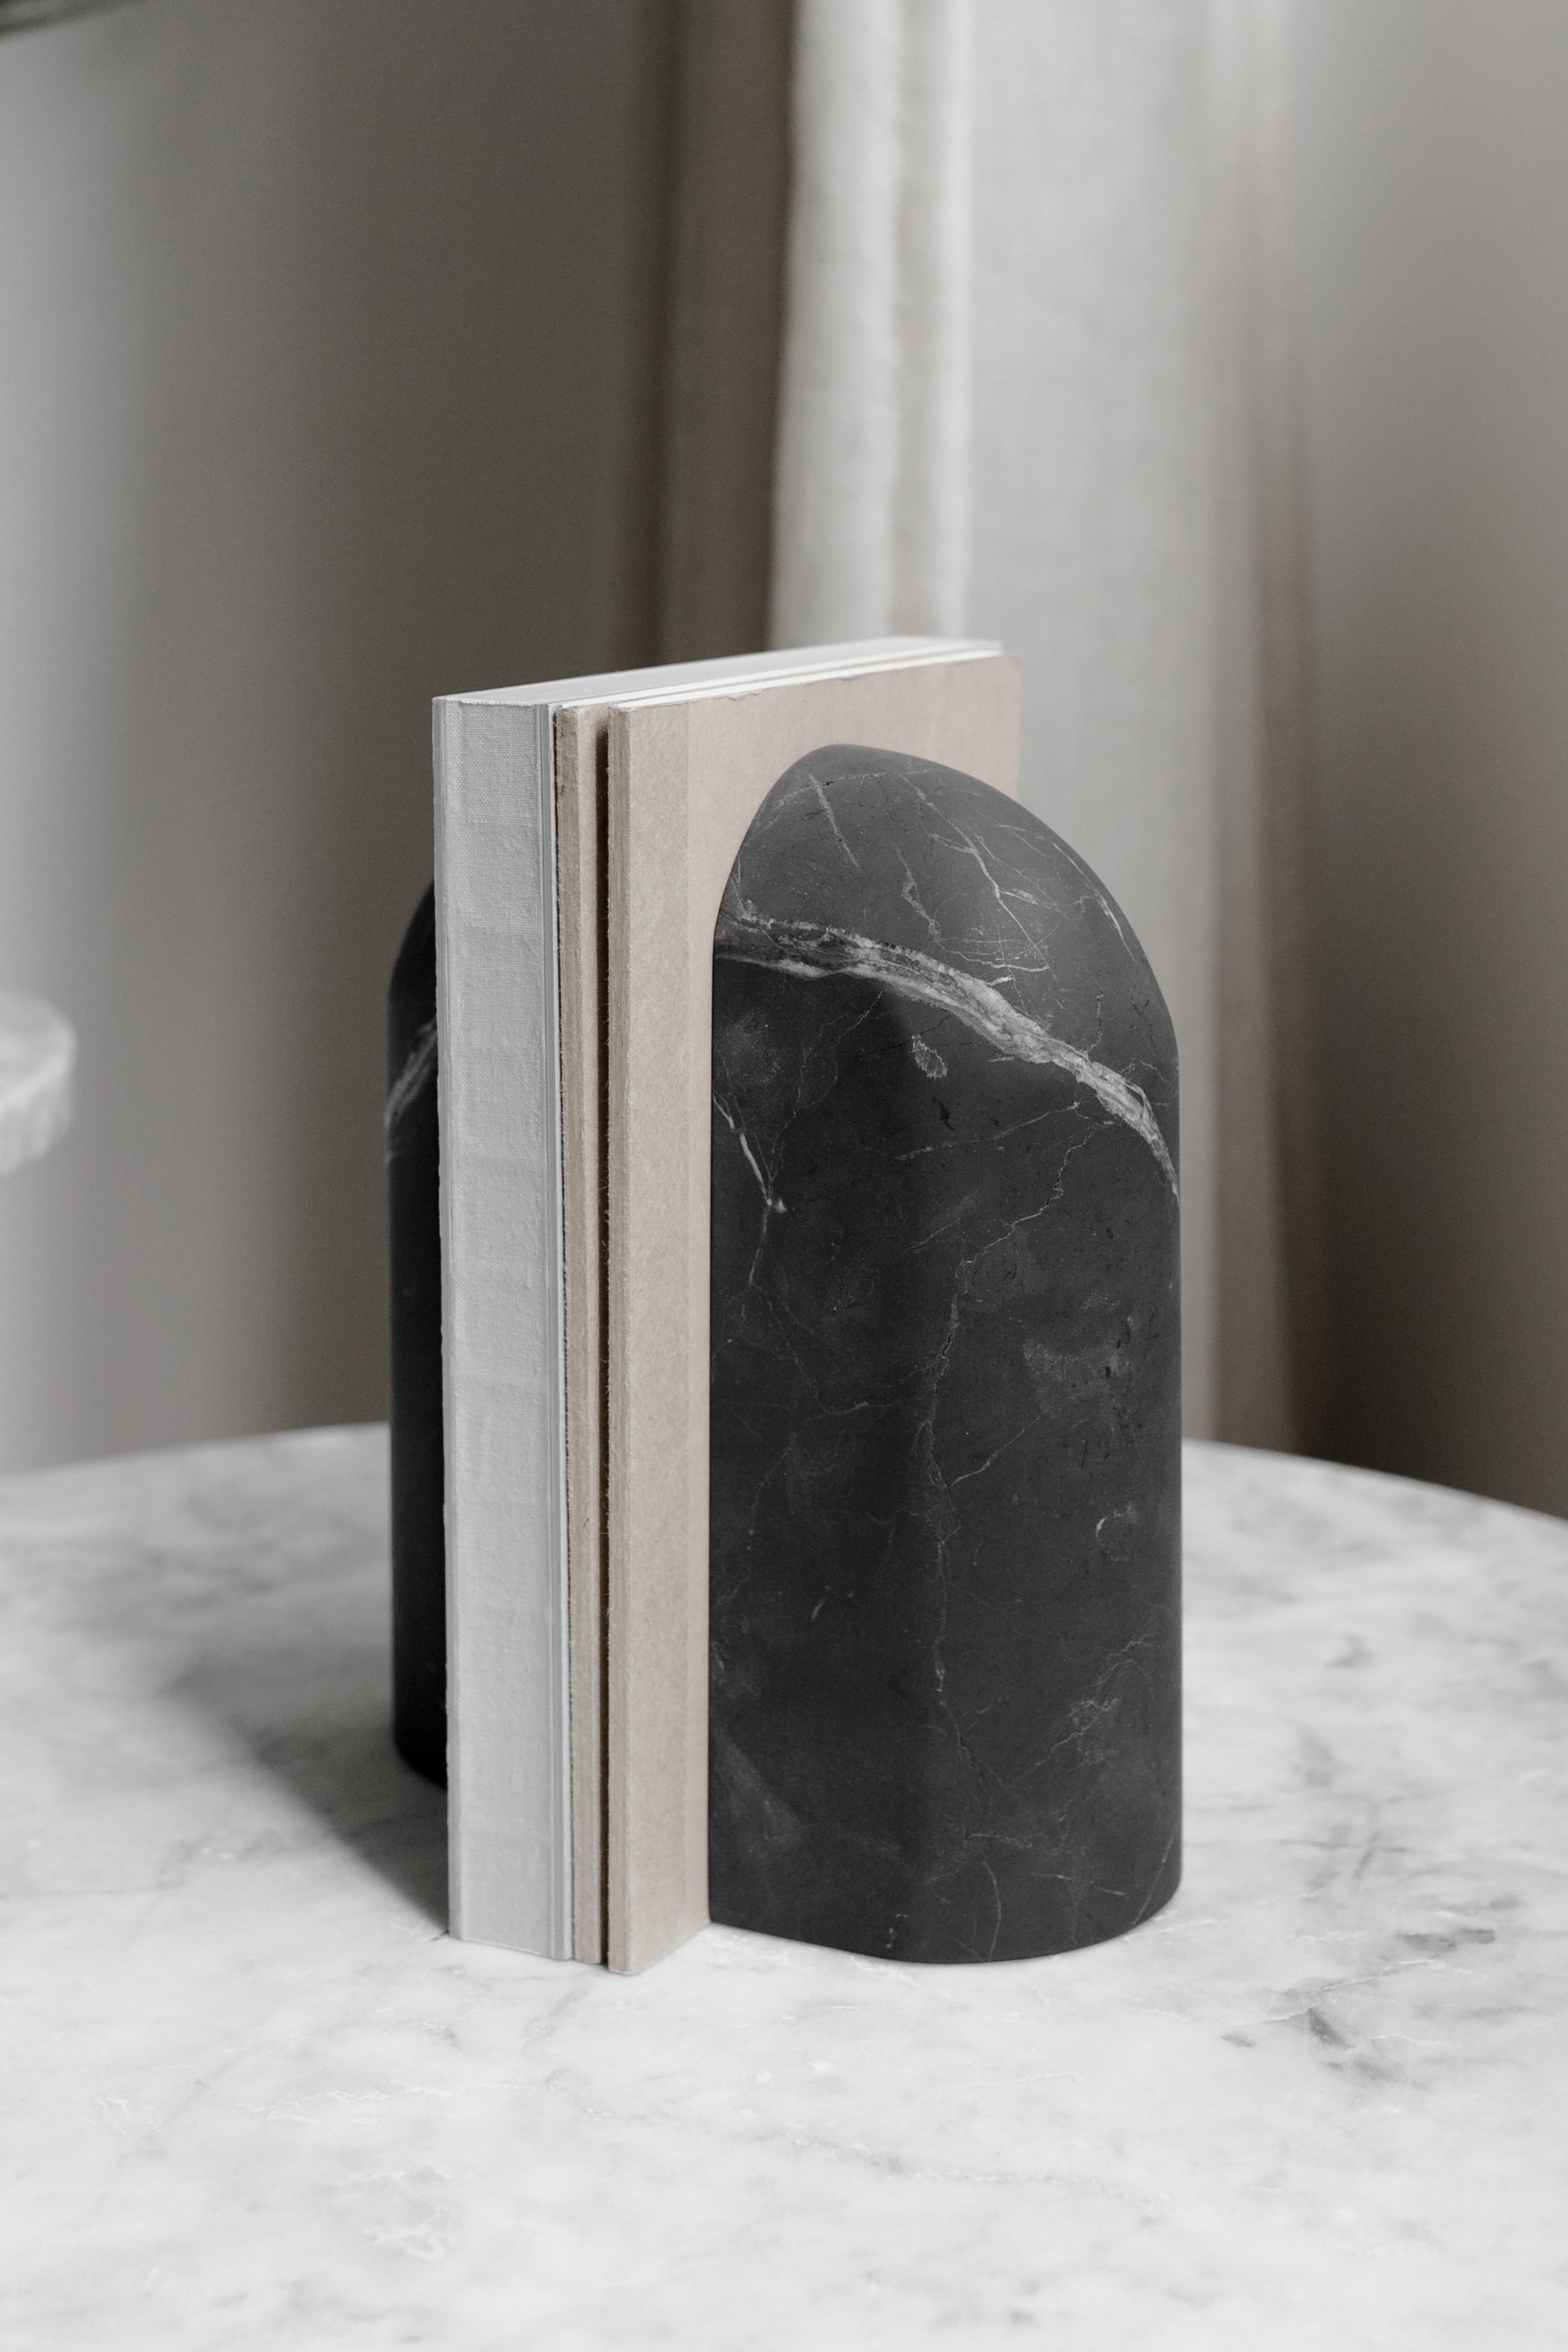 Bookend in carved Monterrey black marble. Handmade in Mexico.  Production time: 6-8 weeks for items without marble / 13-14 weeks for marble pieces. Shipping +10 additional business days. Casa Quieta uses natural materials such as woods, stones,